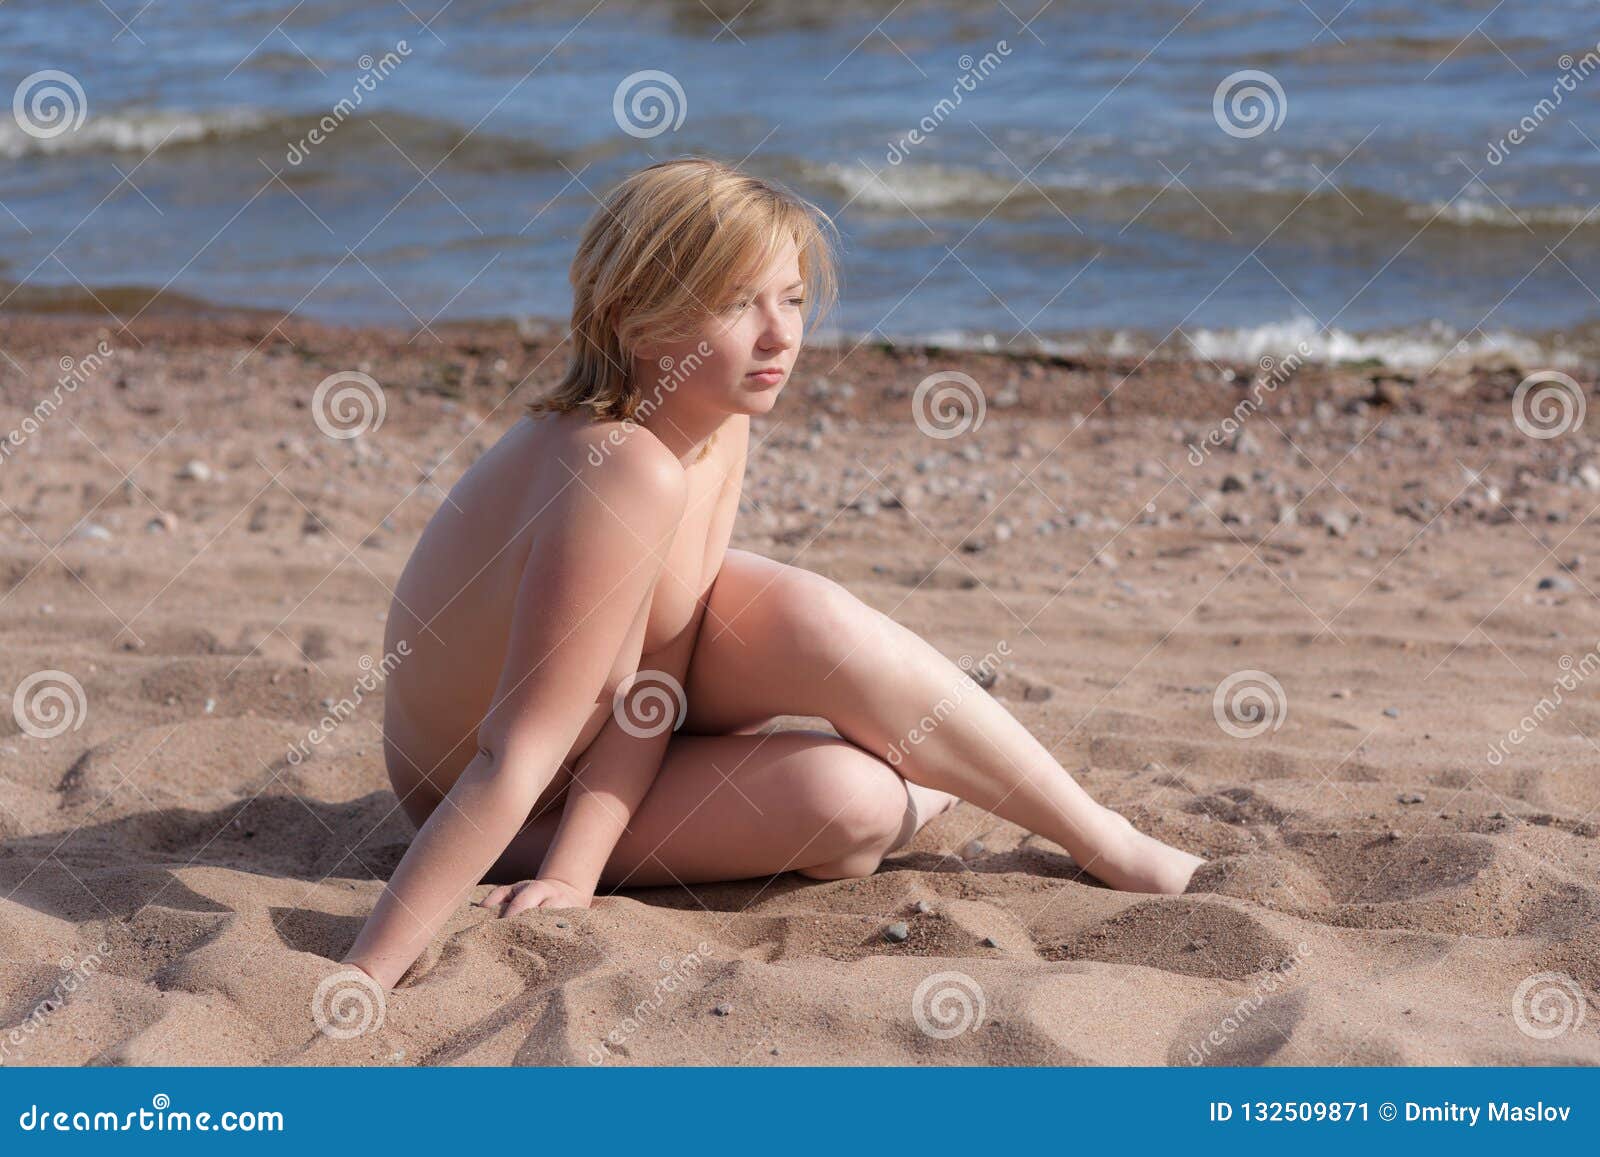 carrie cannon add naked at the beach photo